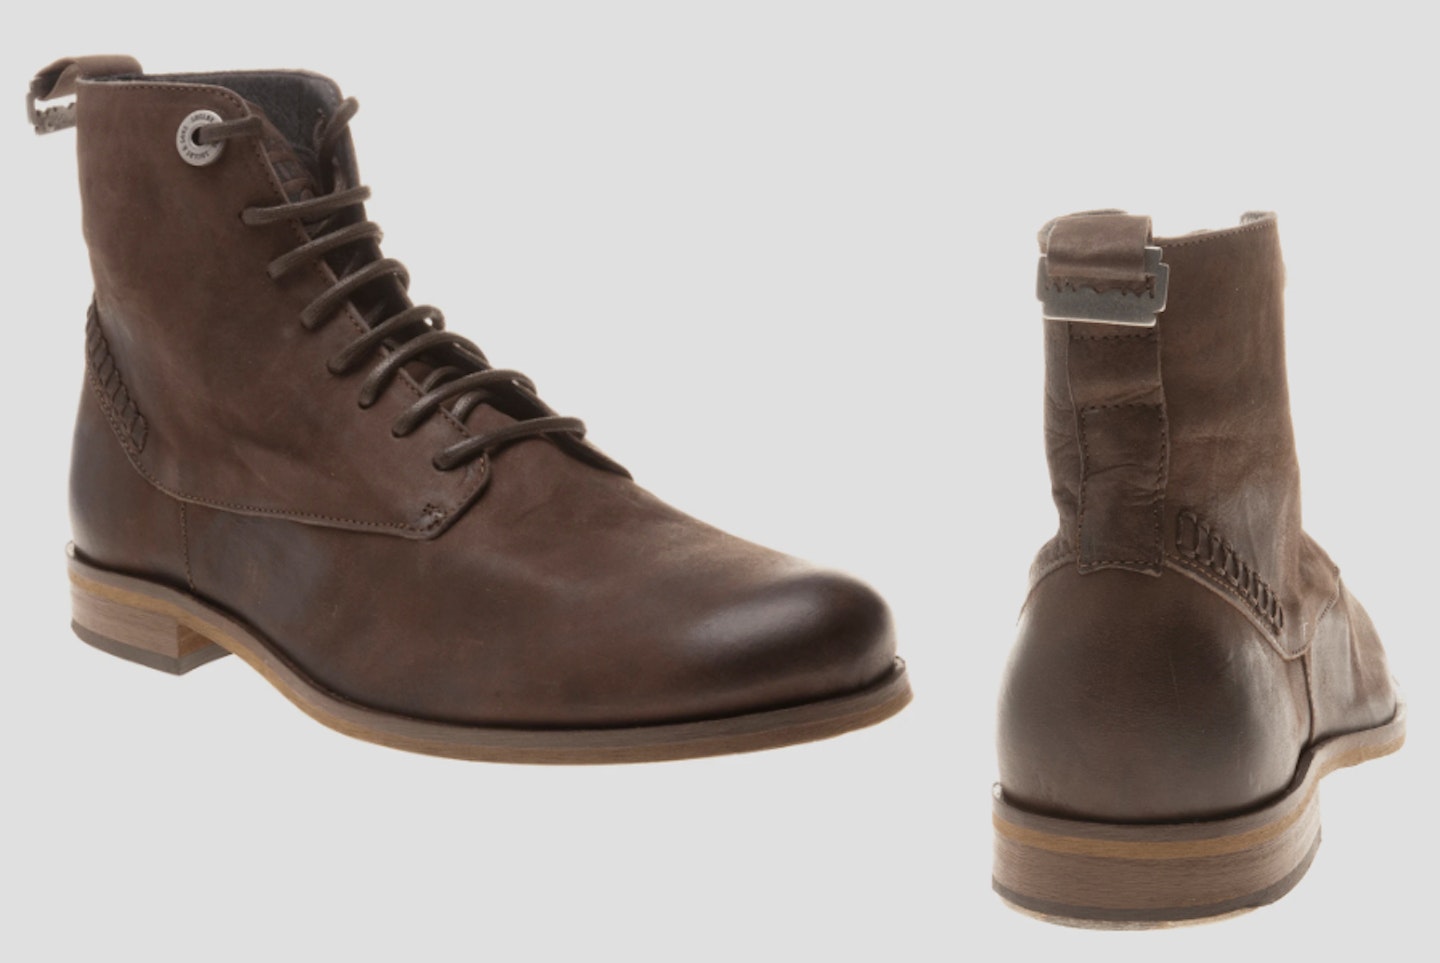 Shelby & Sons Shelby Lace Up Boots